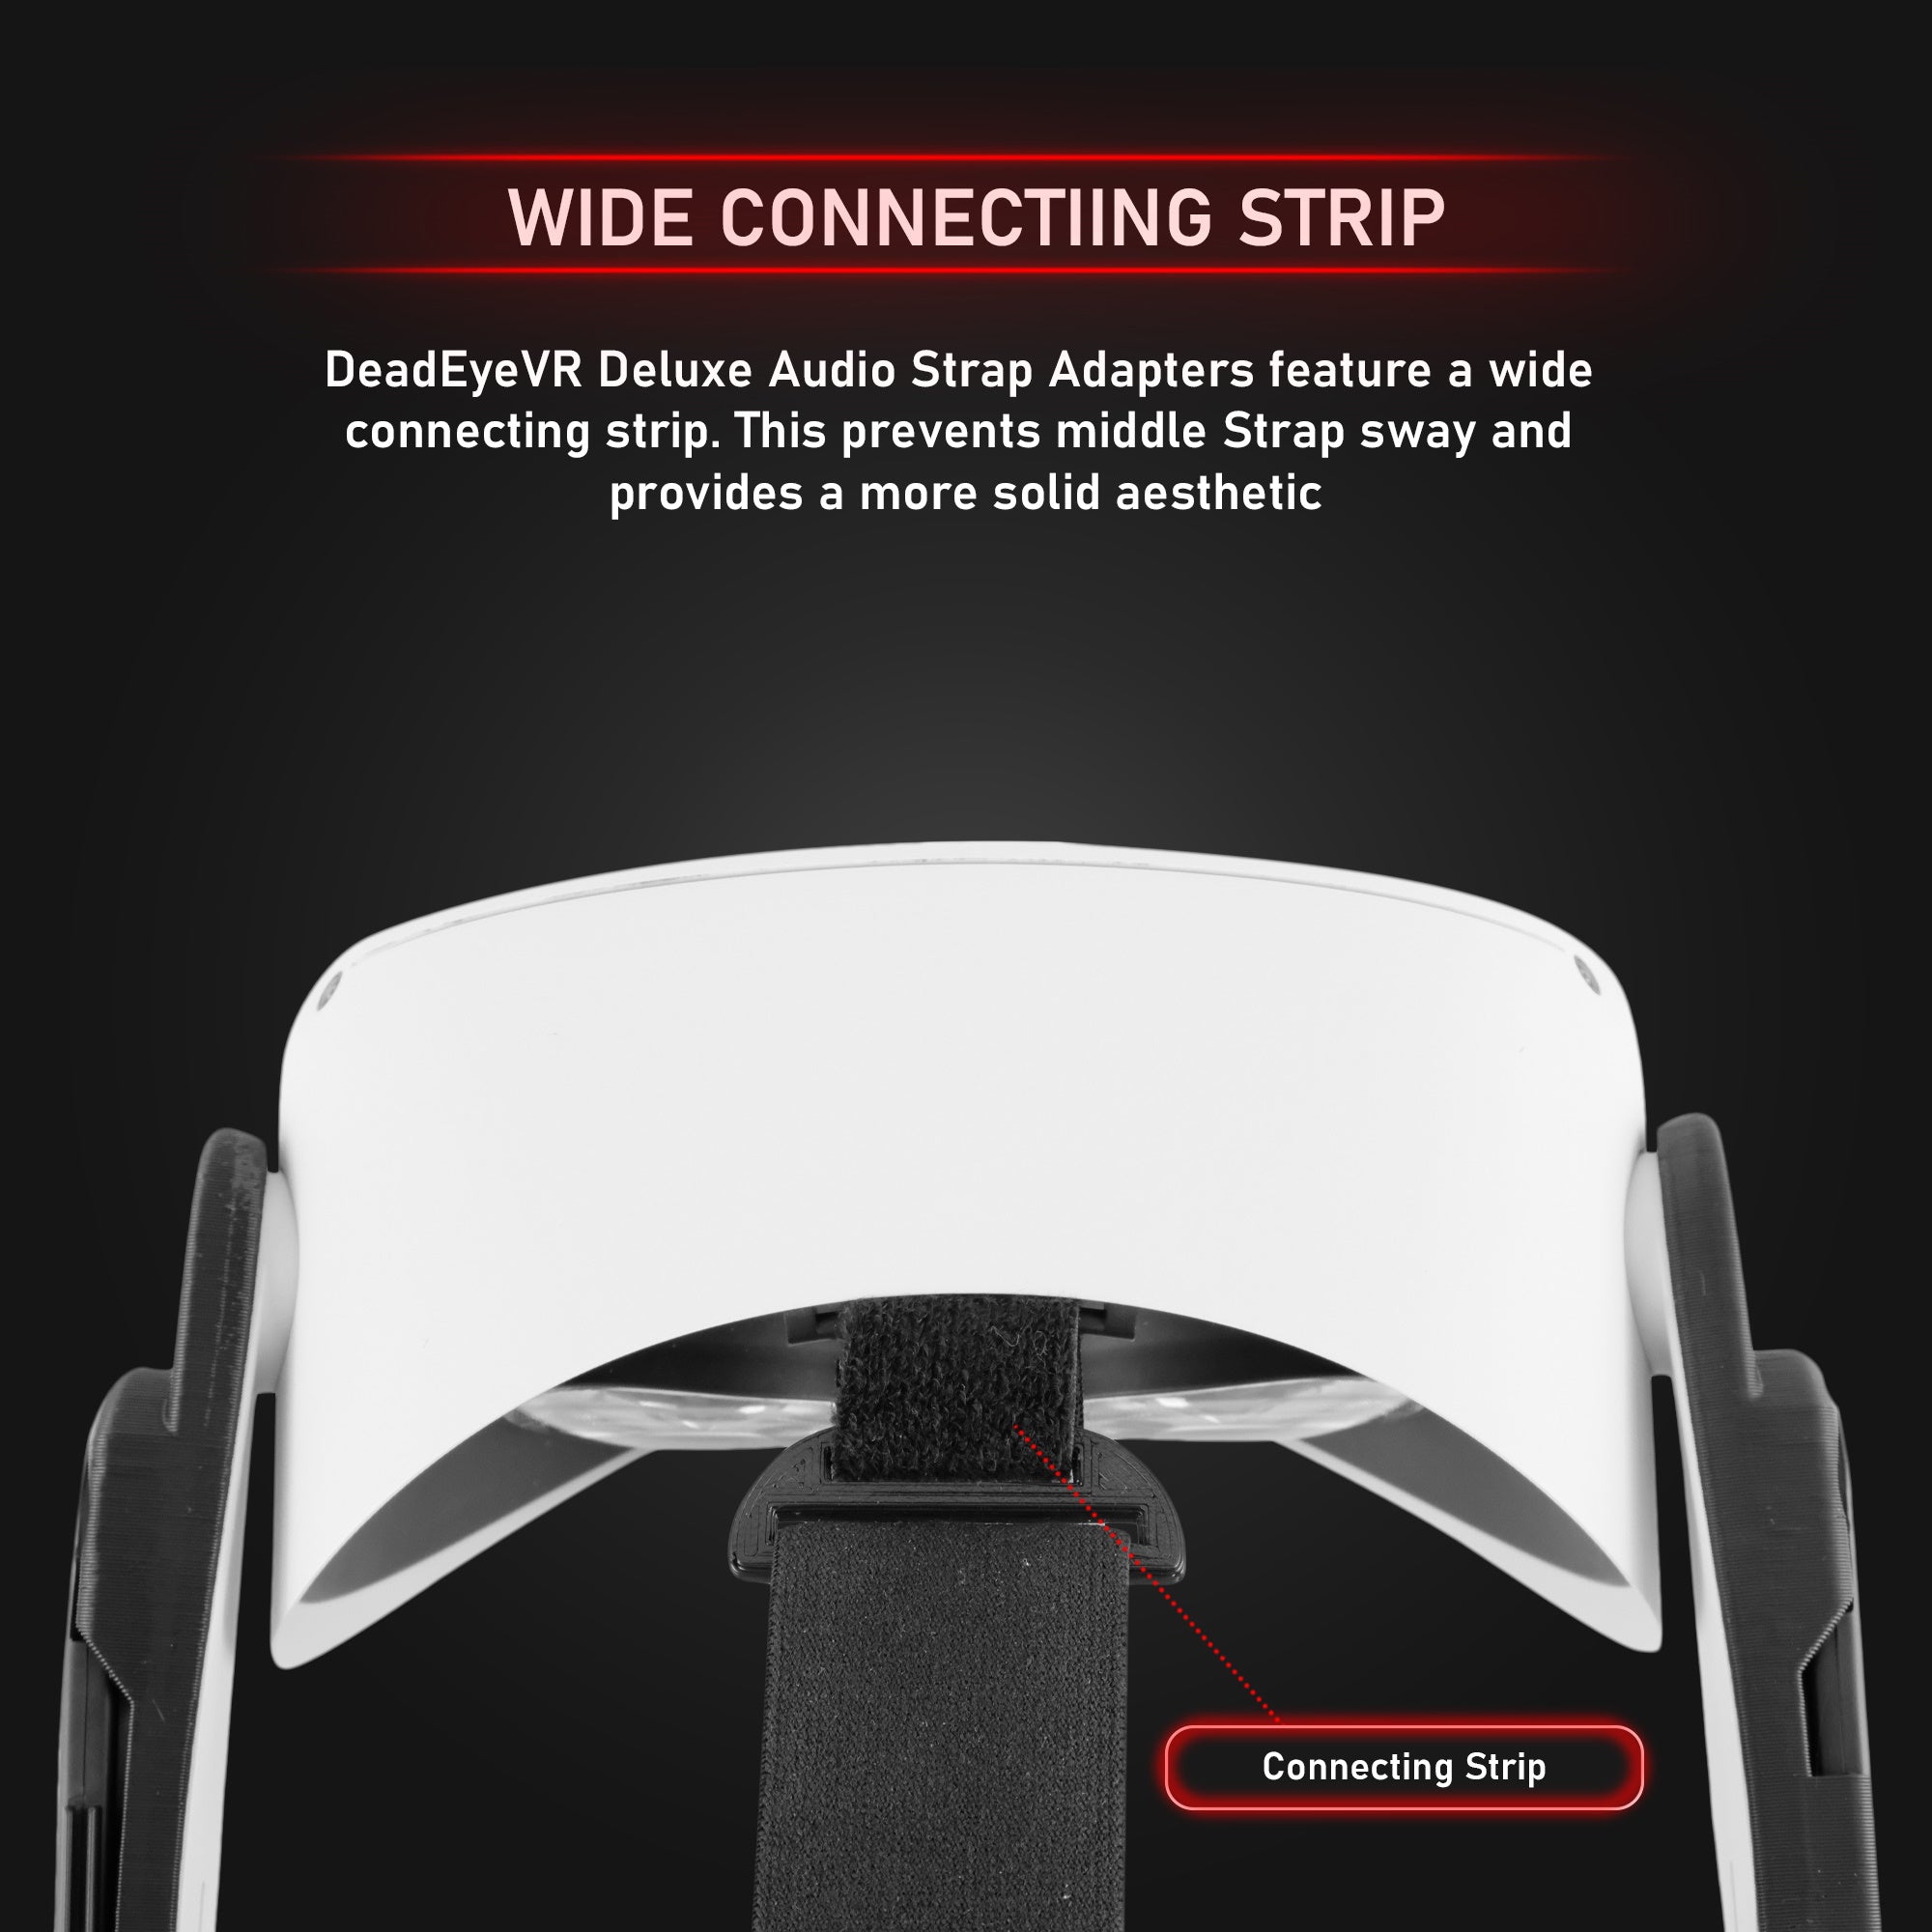 Wide Connecting Strip. DeadEyeVR Deluxe Audio Strap Adapters Feature a wide connecting strip. This prevents middle strap sway and provides a more solid aesthetic